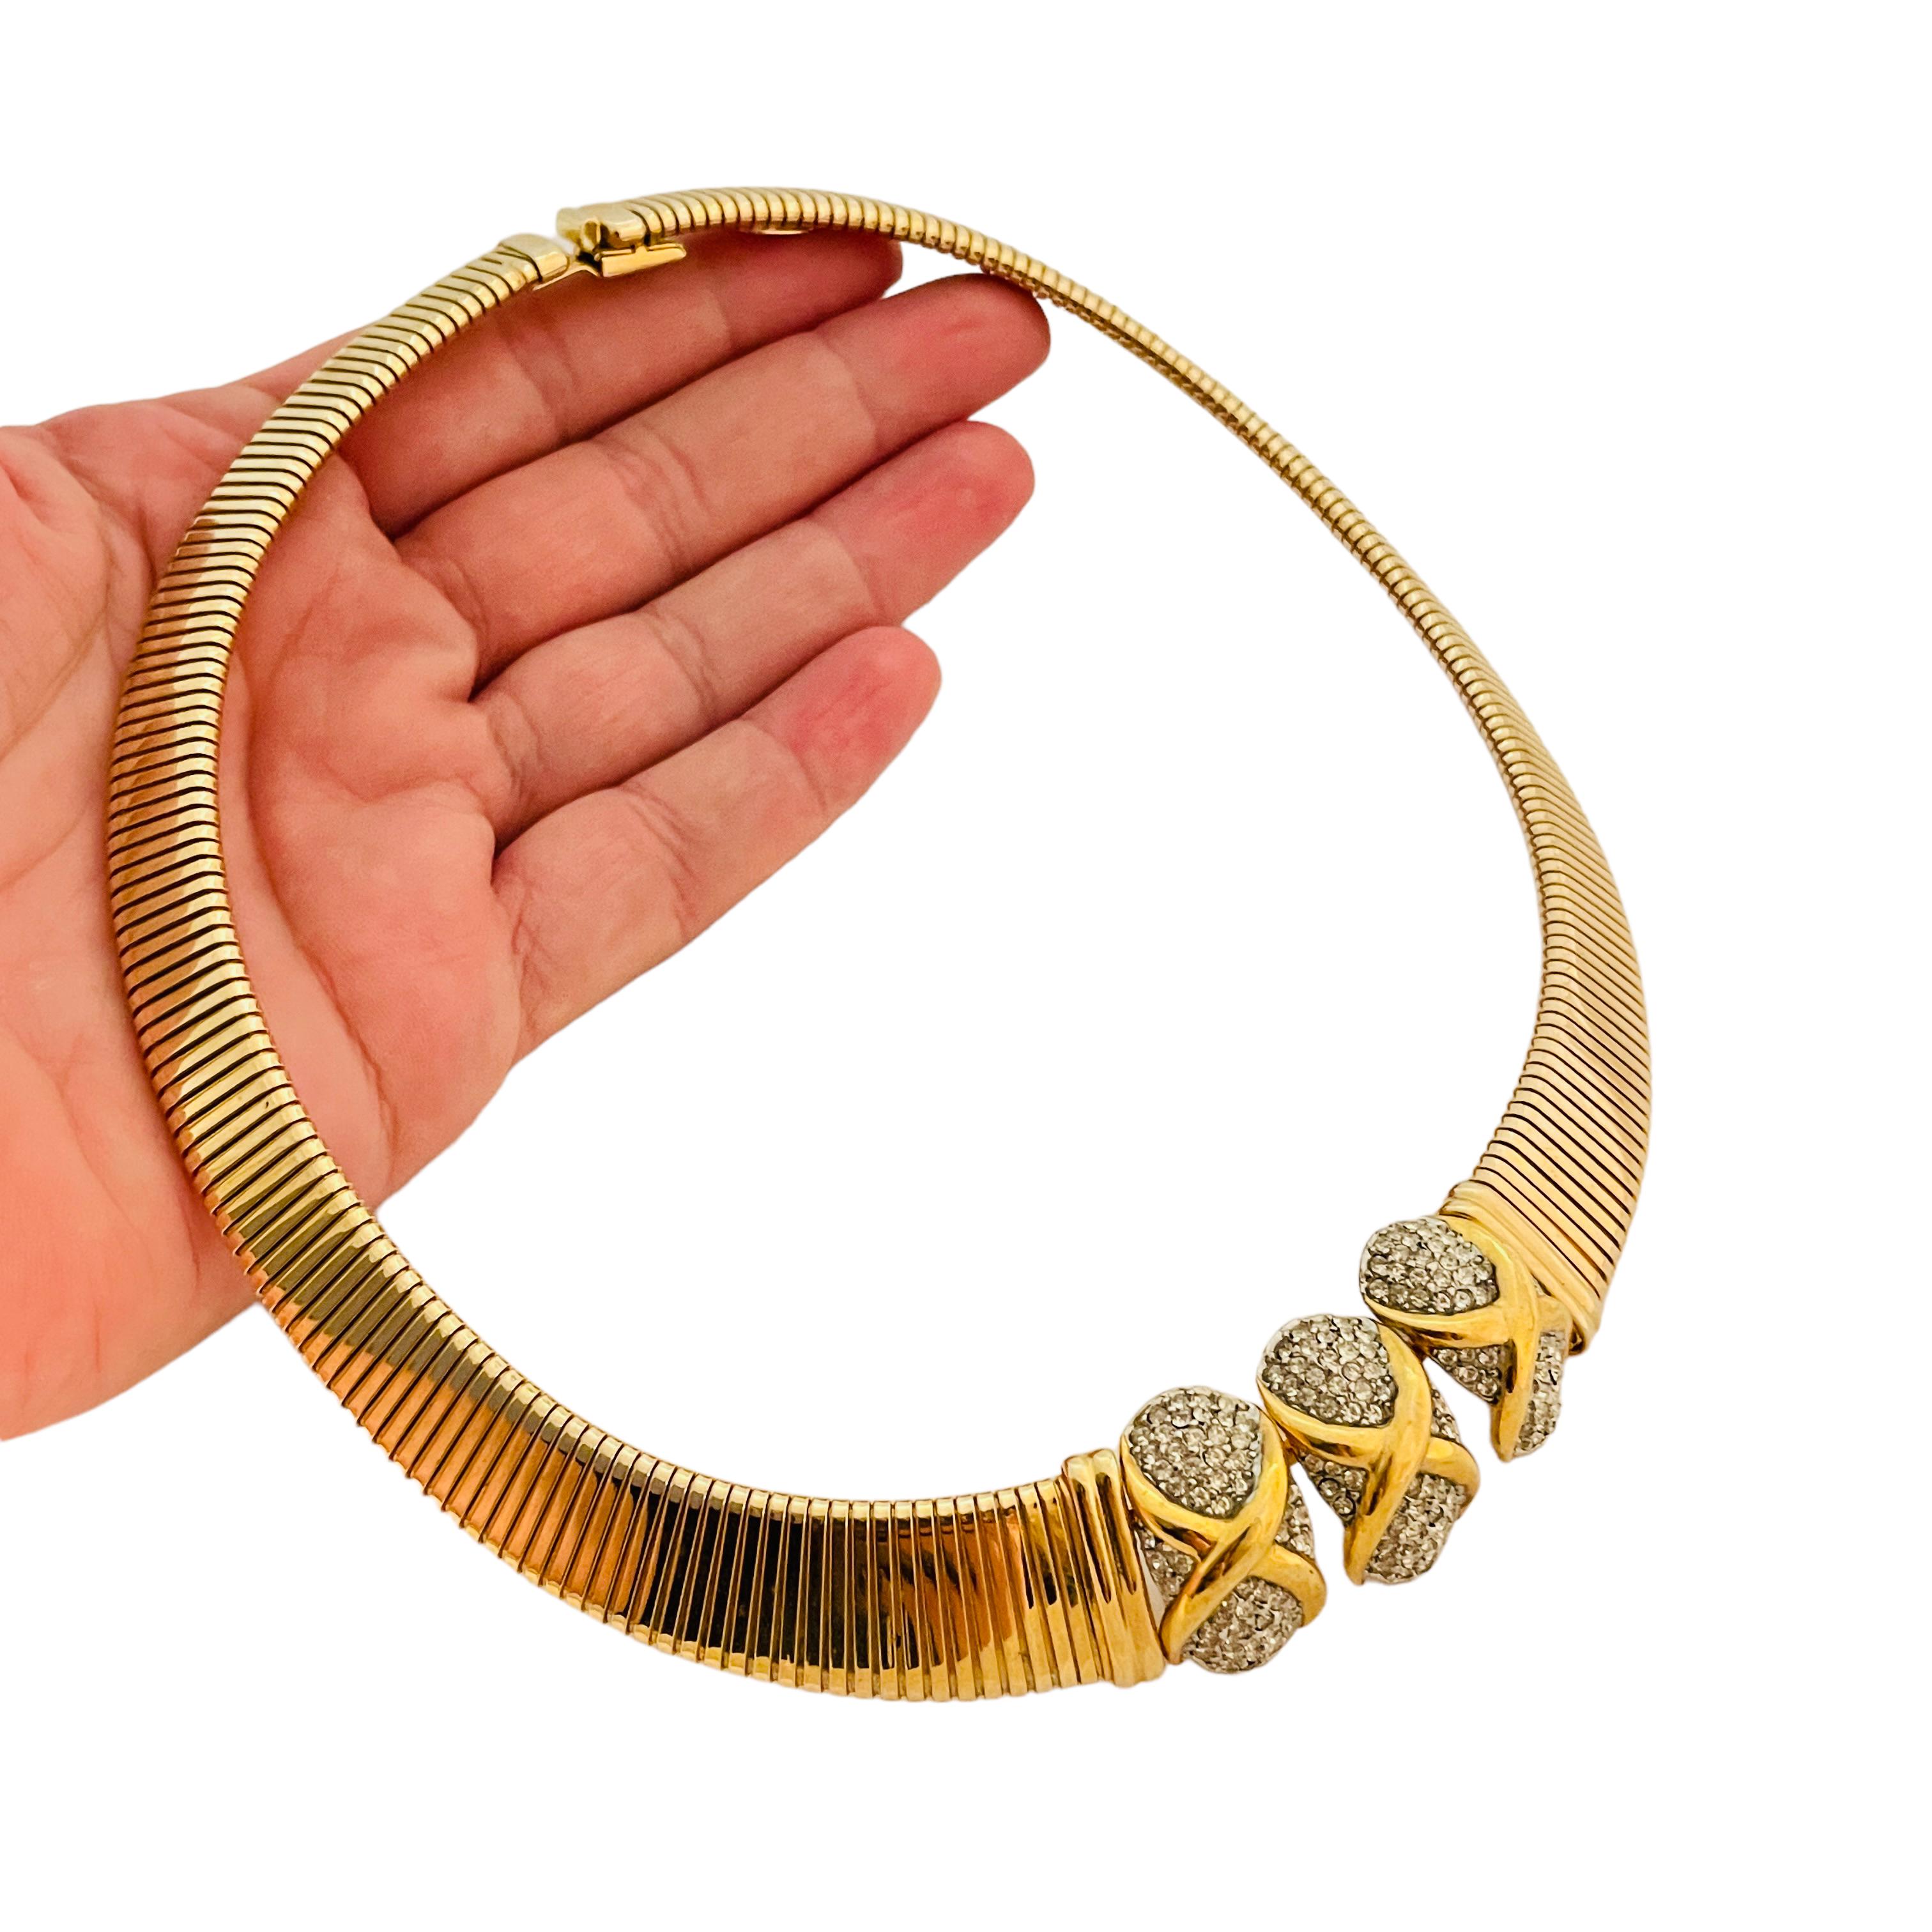 Vintage JOAN COLLINS gold rhinestone omega chain designer runway necklace In Good Condition For Sale In Palos Hills, IL